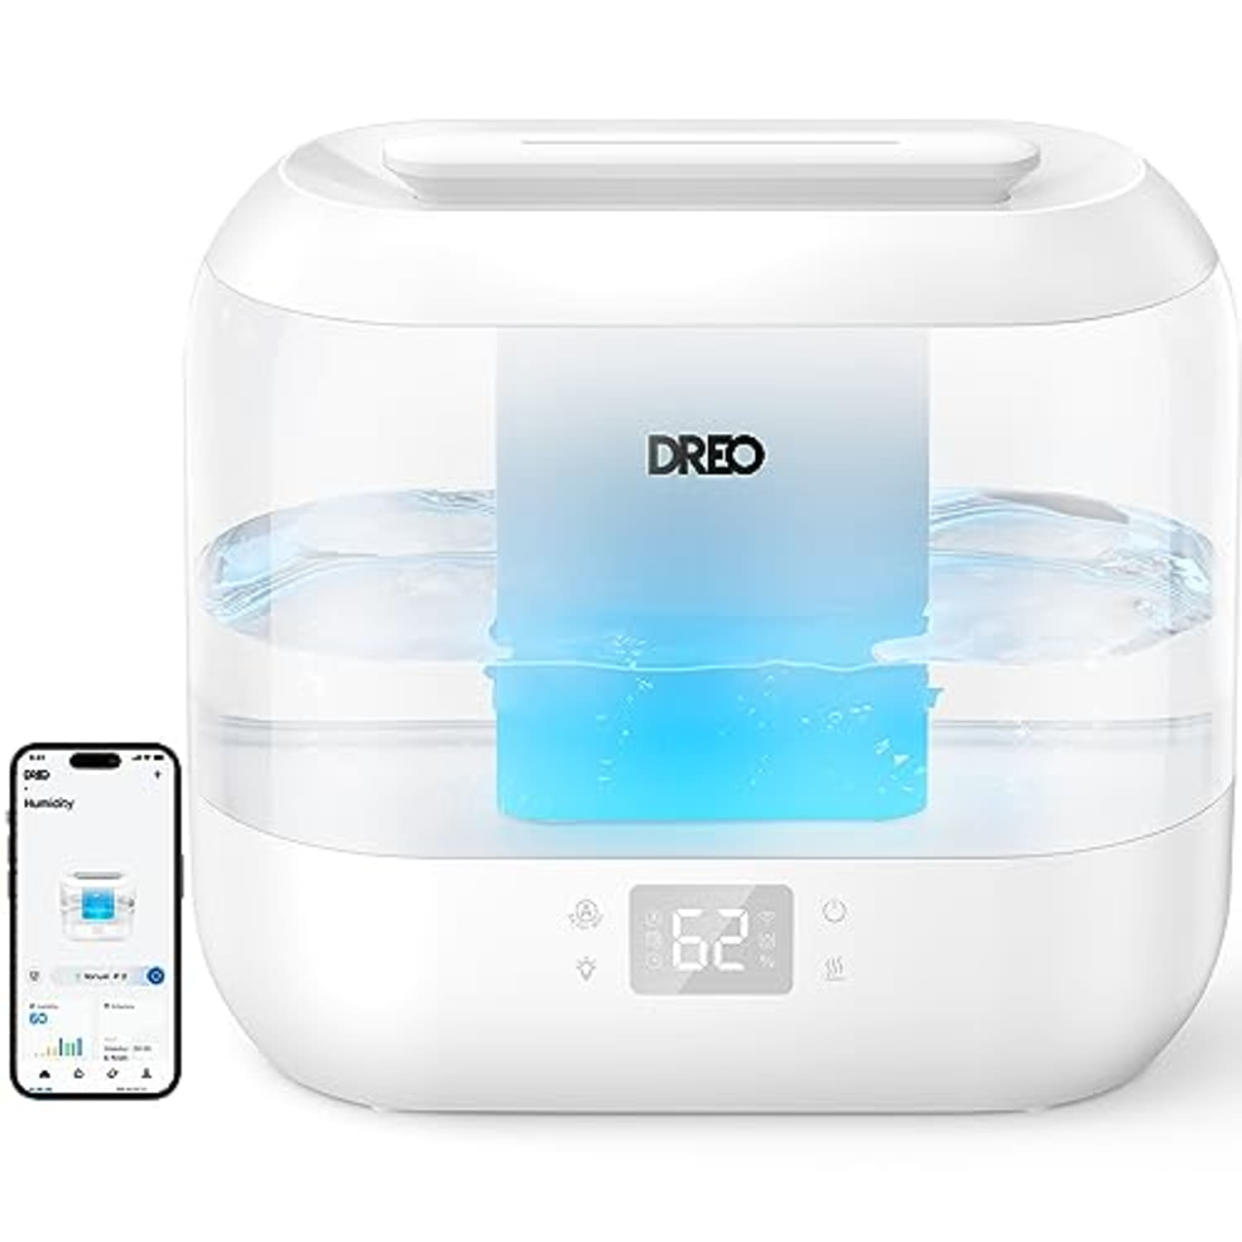 Dreo Smart Humidifier, Cool Mist Humidifiers for Bedroom, Quiet 4L Top Fill Ultrasonic Humidifiers for Home Office Plant & Baby with Nightlight, LED Display, 32H Runtime, APP/Voice Control, HM311S (AMAZON)